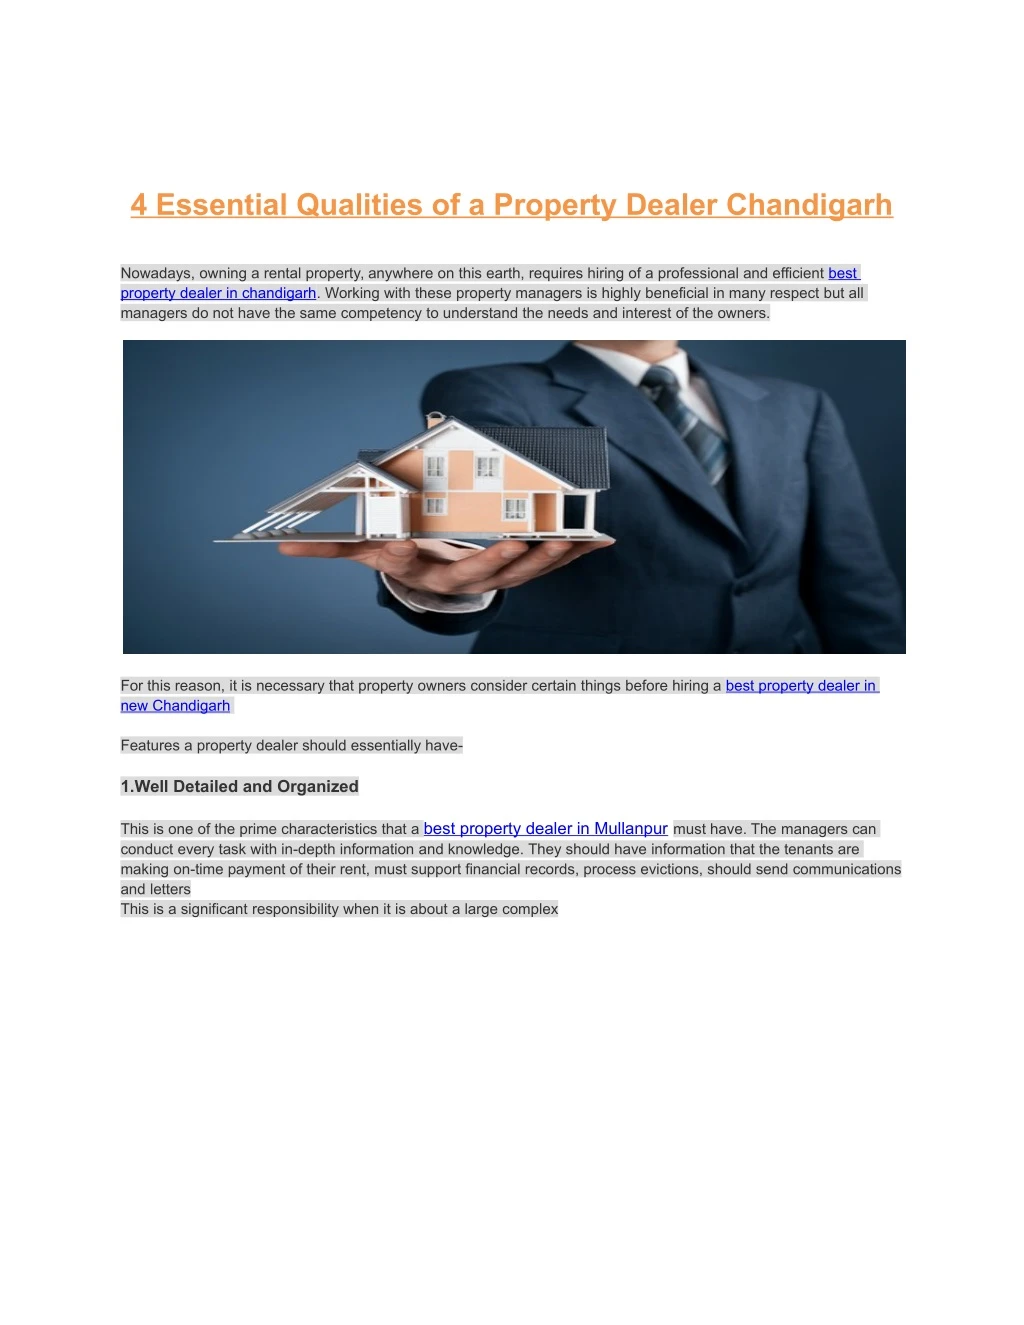 4 essential qualities of a property dealer